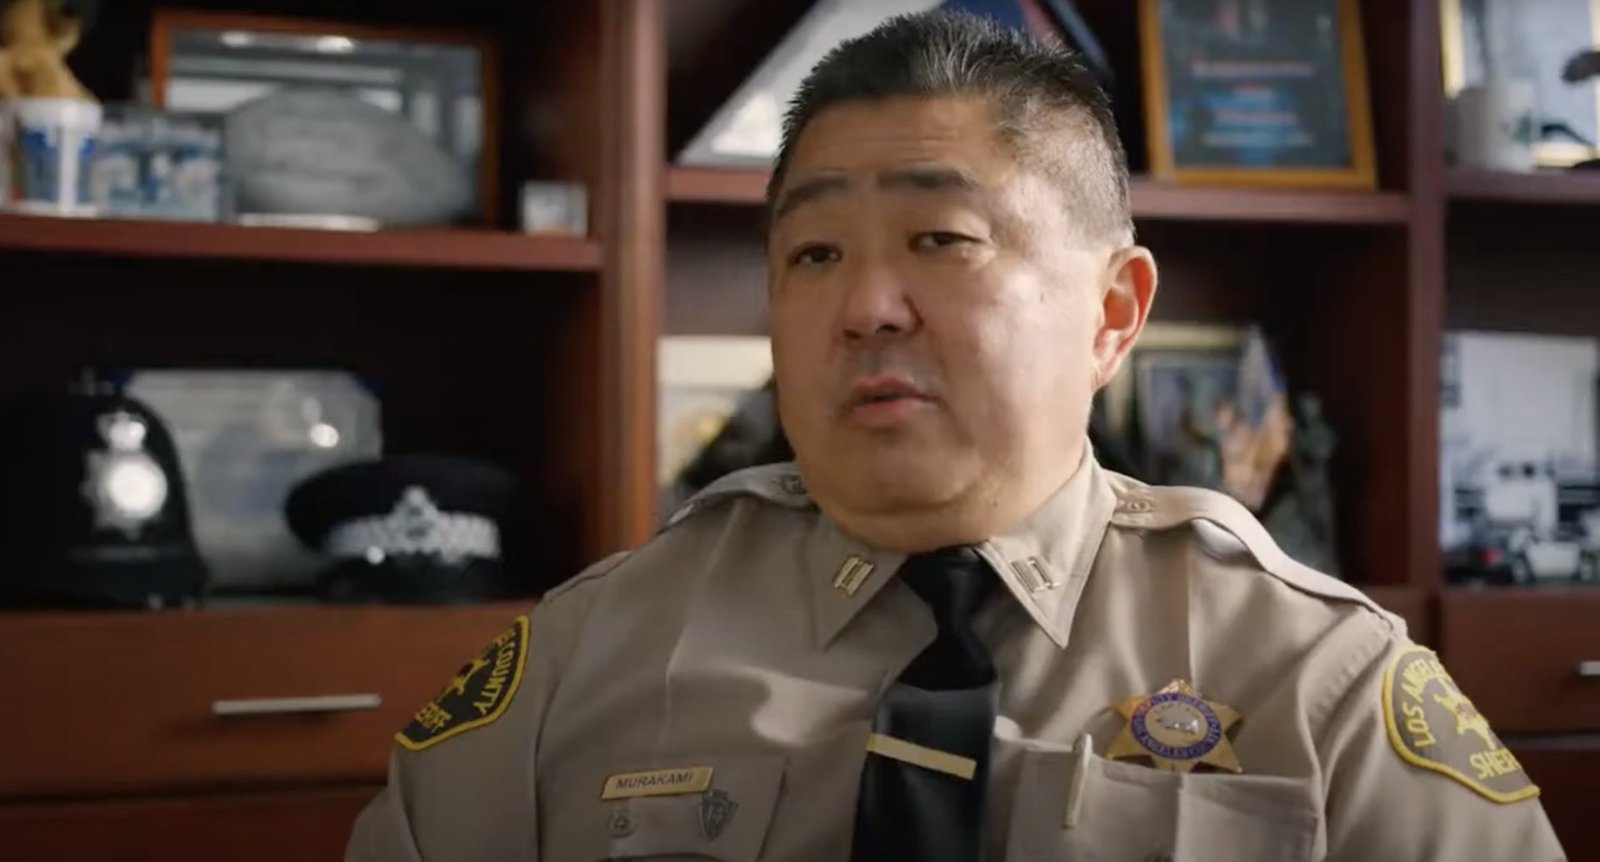 Screenshot of Timothy Murakami wearing his uniform with a shelf with police paraphernalia in the background.